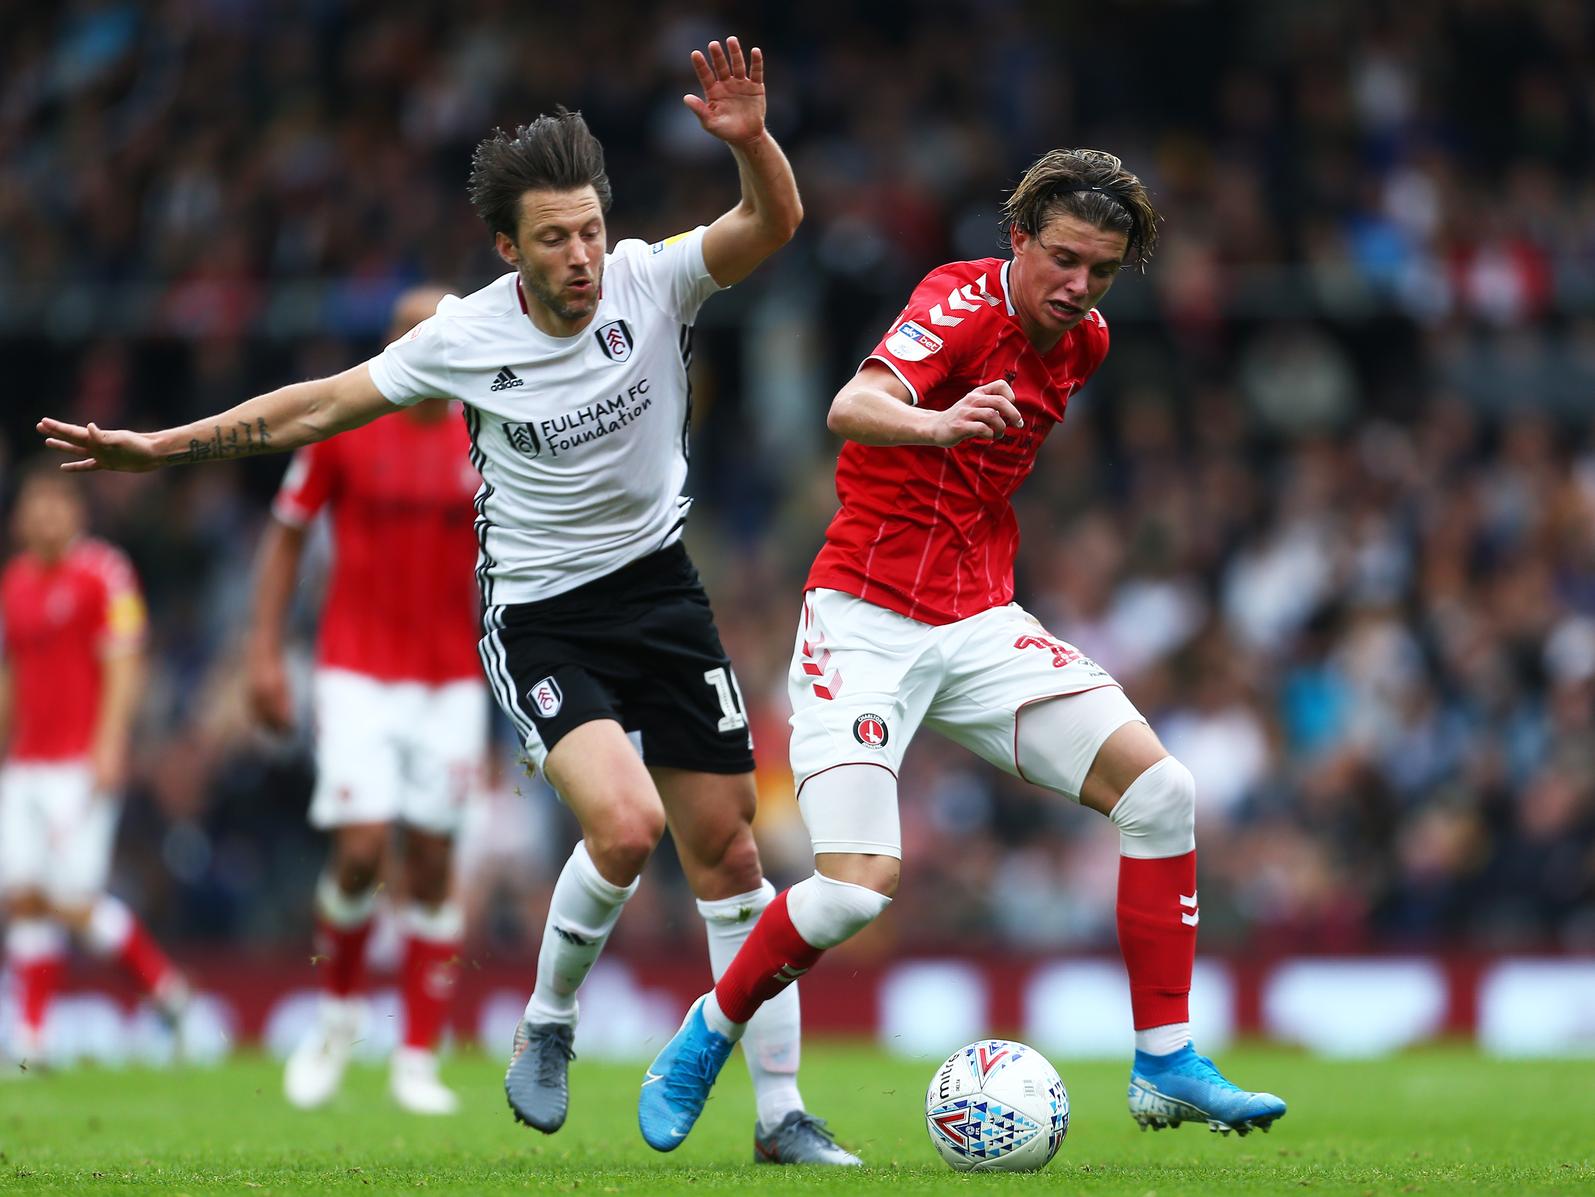 Charlton Athletic boss Lee Bowyer has revealed that Chelsea are delighted with the progress of their loanee Conor Gallagher, who has played an integral role in the Addicks' fine start to the campaign. (Metro)